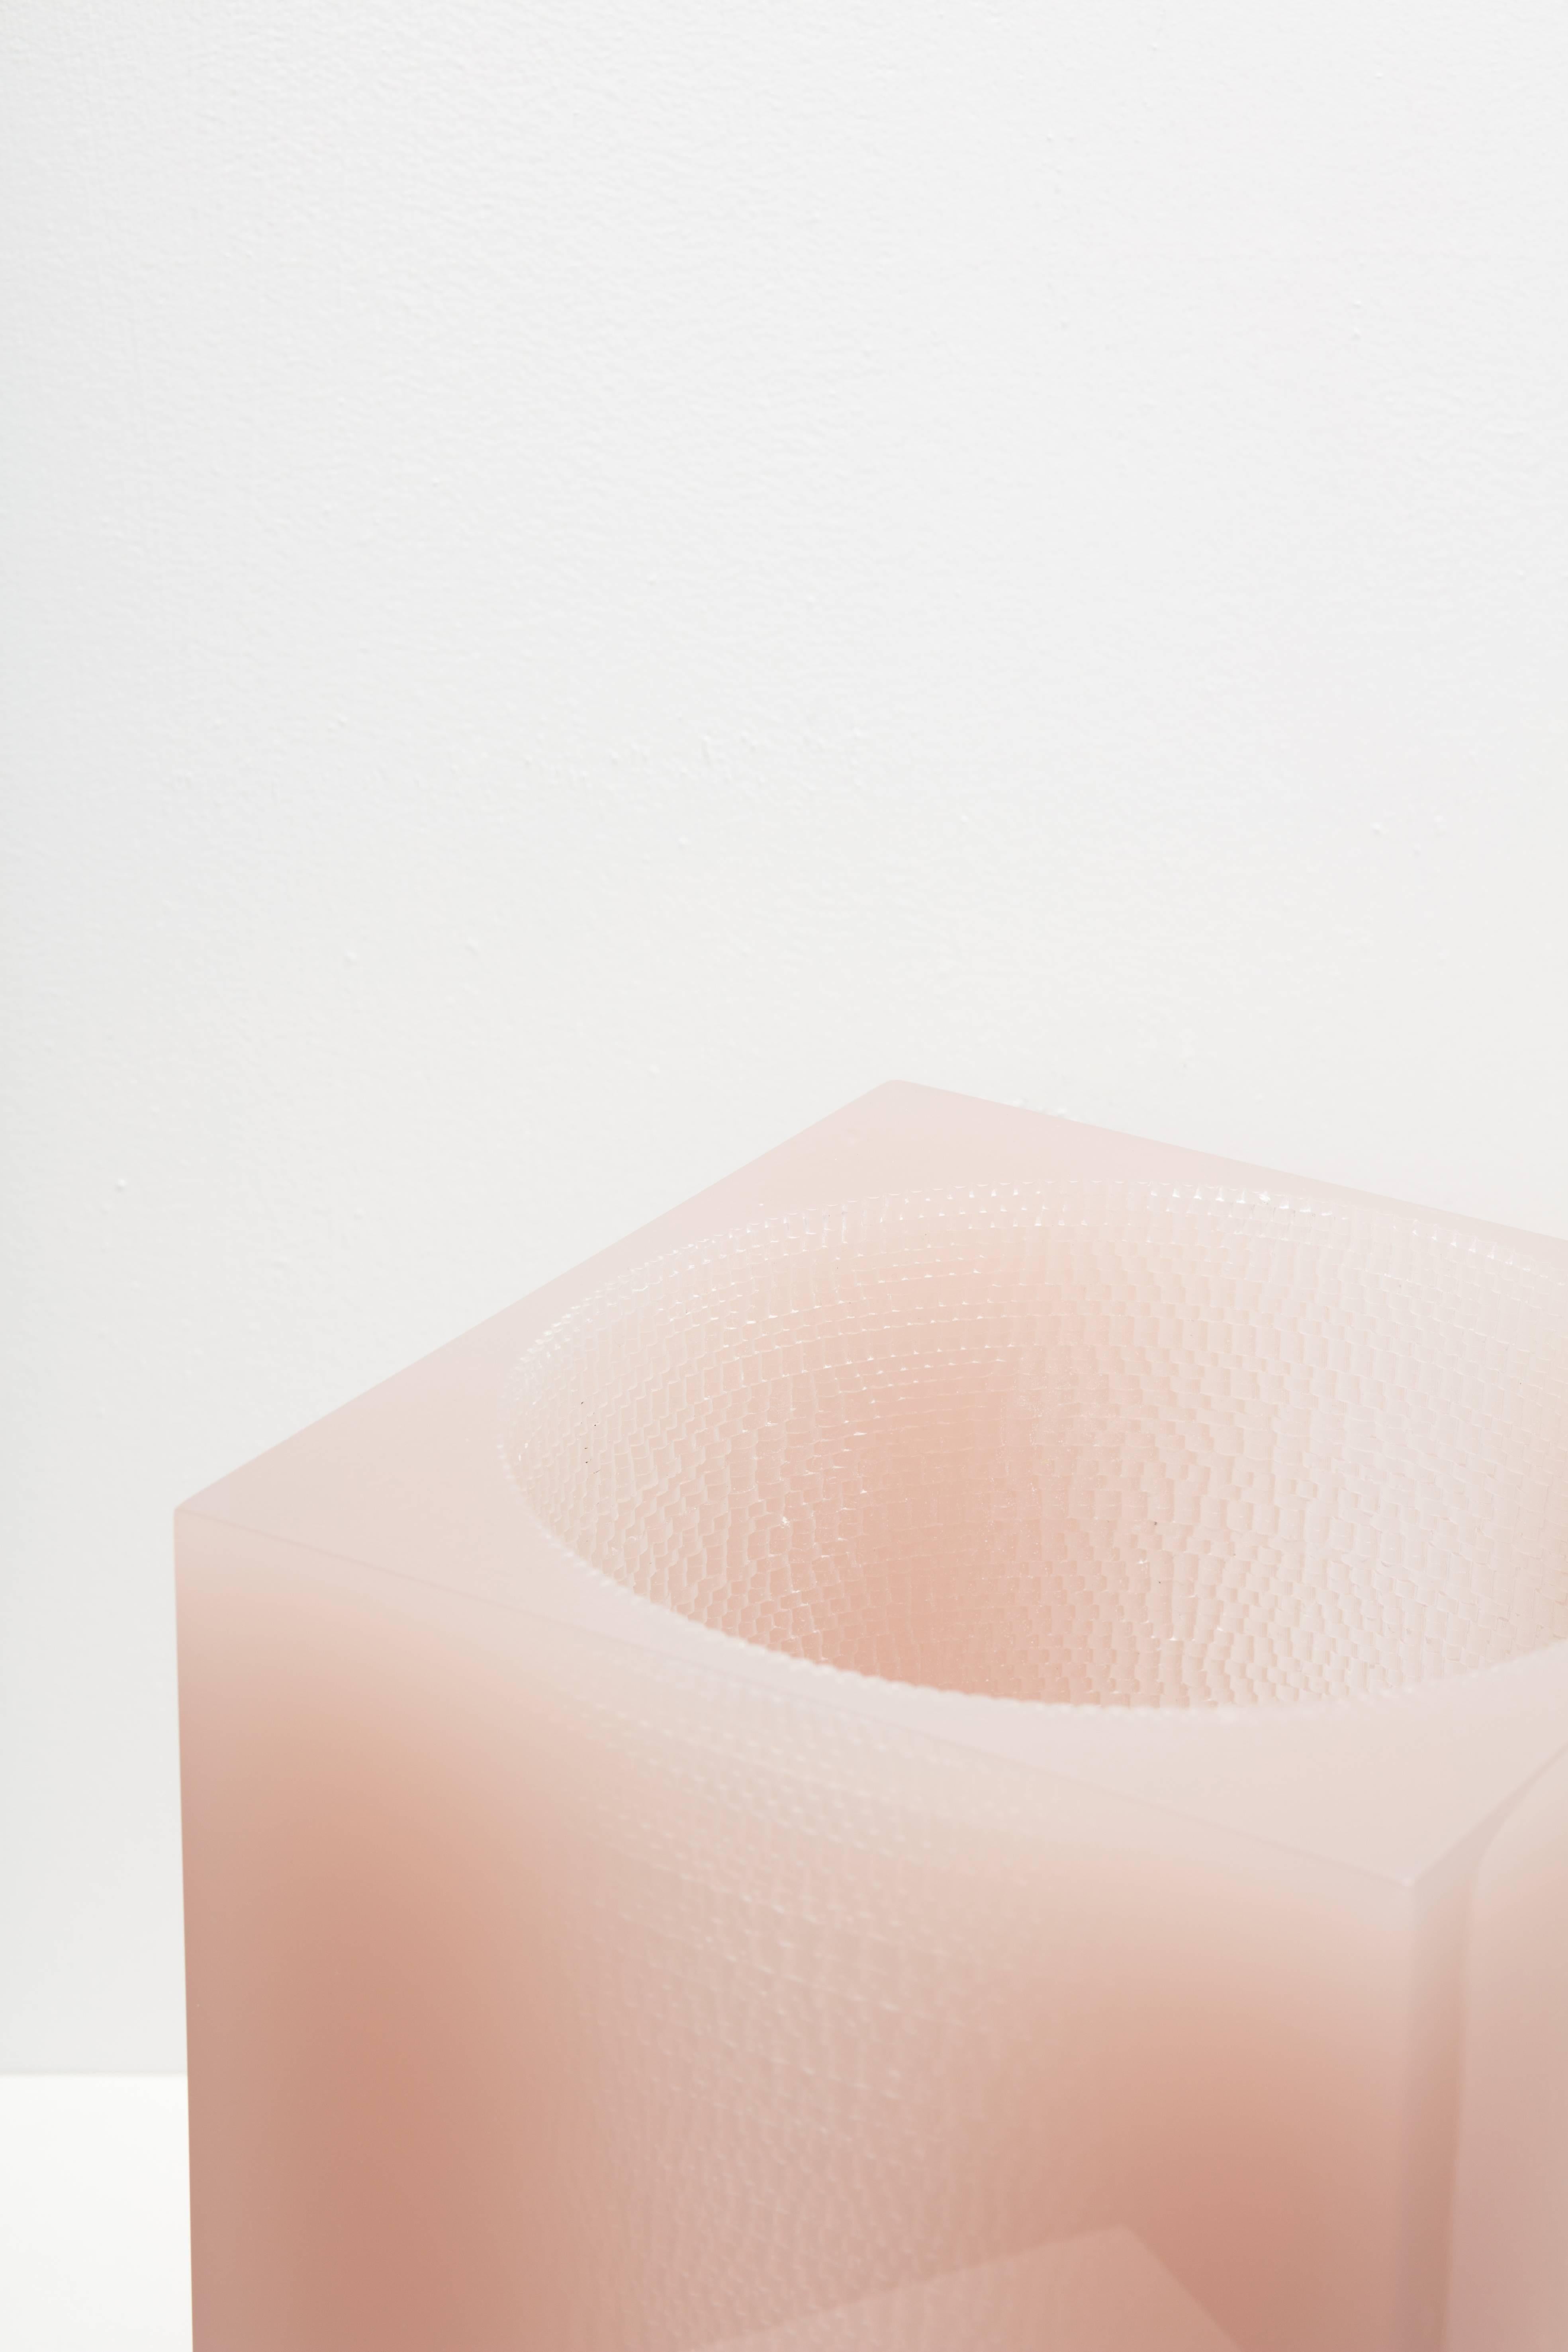 A further exploration into the designers' fascination with natural surface texture, this time in the form of a sculptural vessel of synthetic resin. A glossy square exterior exaggerates the contrast of the rich, natural texture of the circular